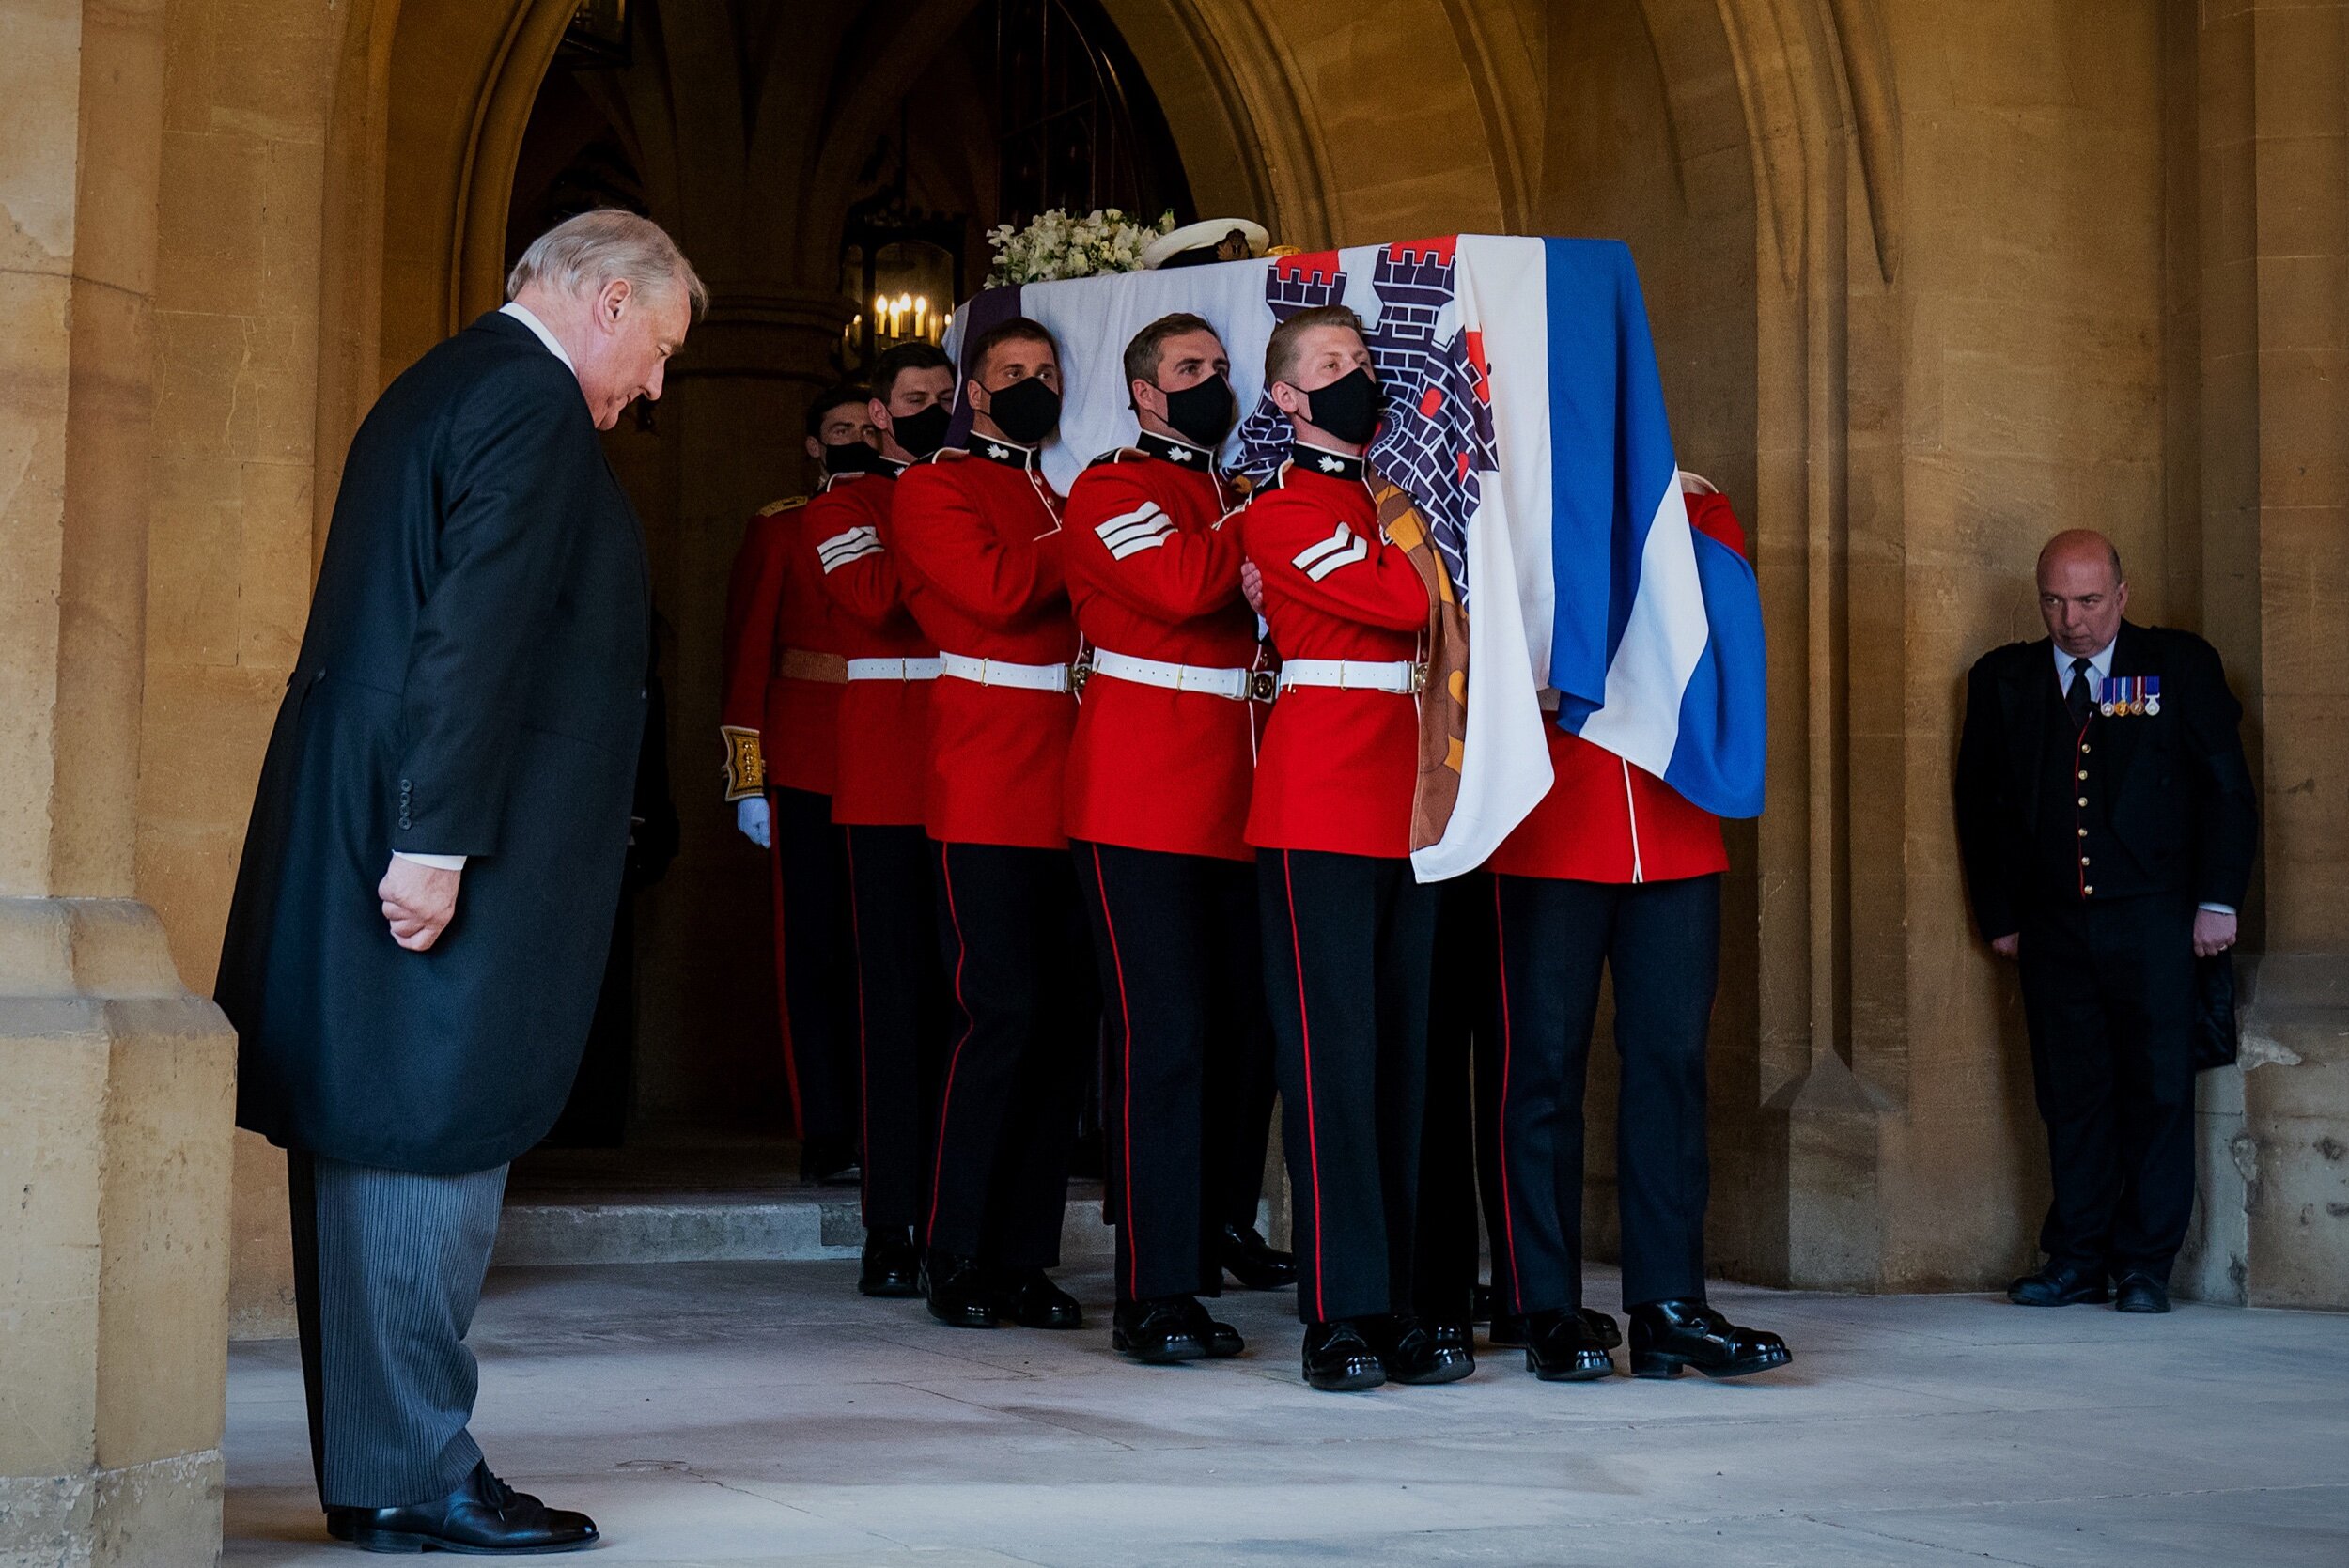   The Duke of Edinburgh's coffin, covered with his Personal Standard, is carried to the purpose built Land Rover Defender ahead of the funeral of the Duke of Edinburgh in Windsor Castle, Berkshire. Picture date: Saturday April 17, 2021.  